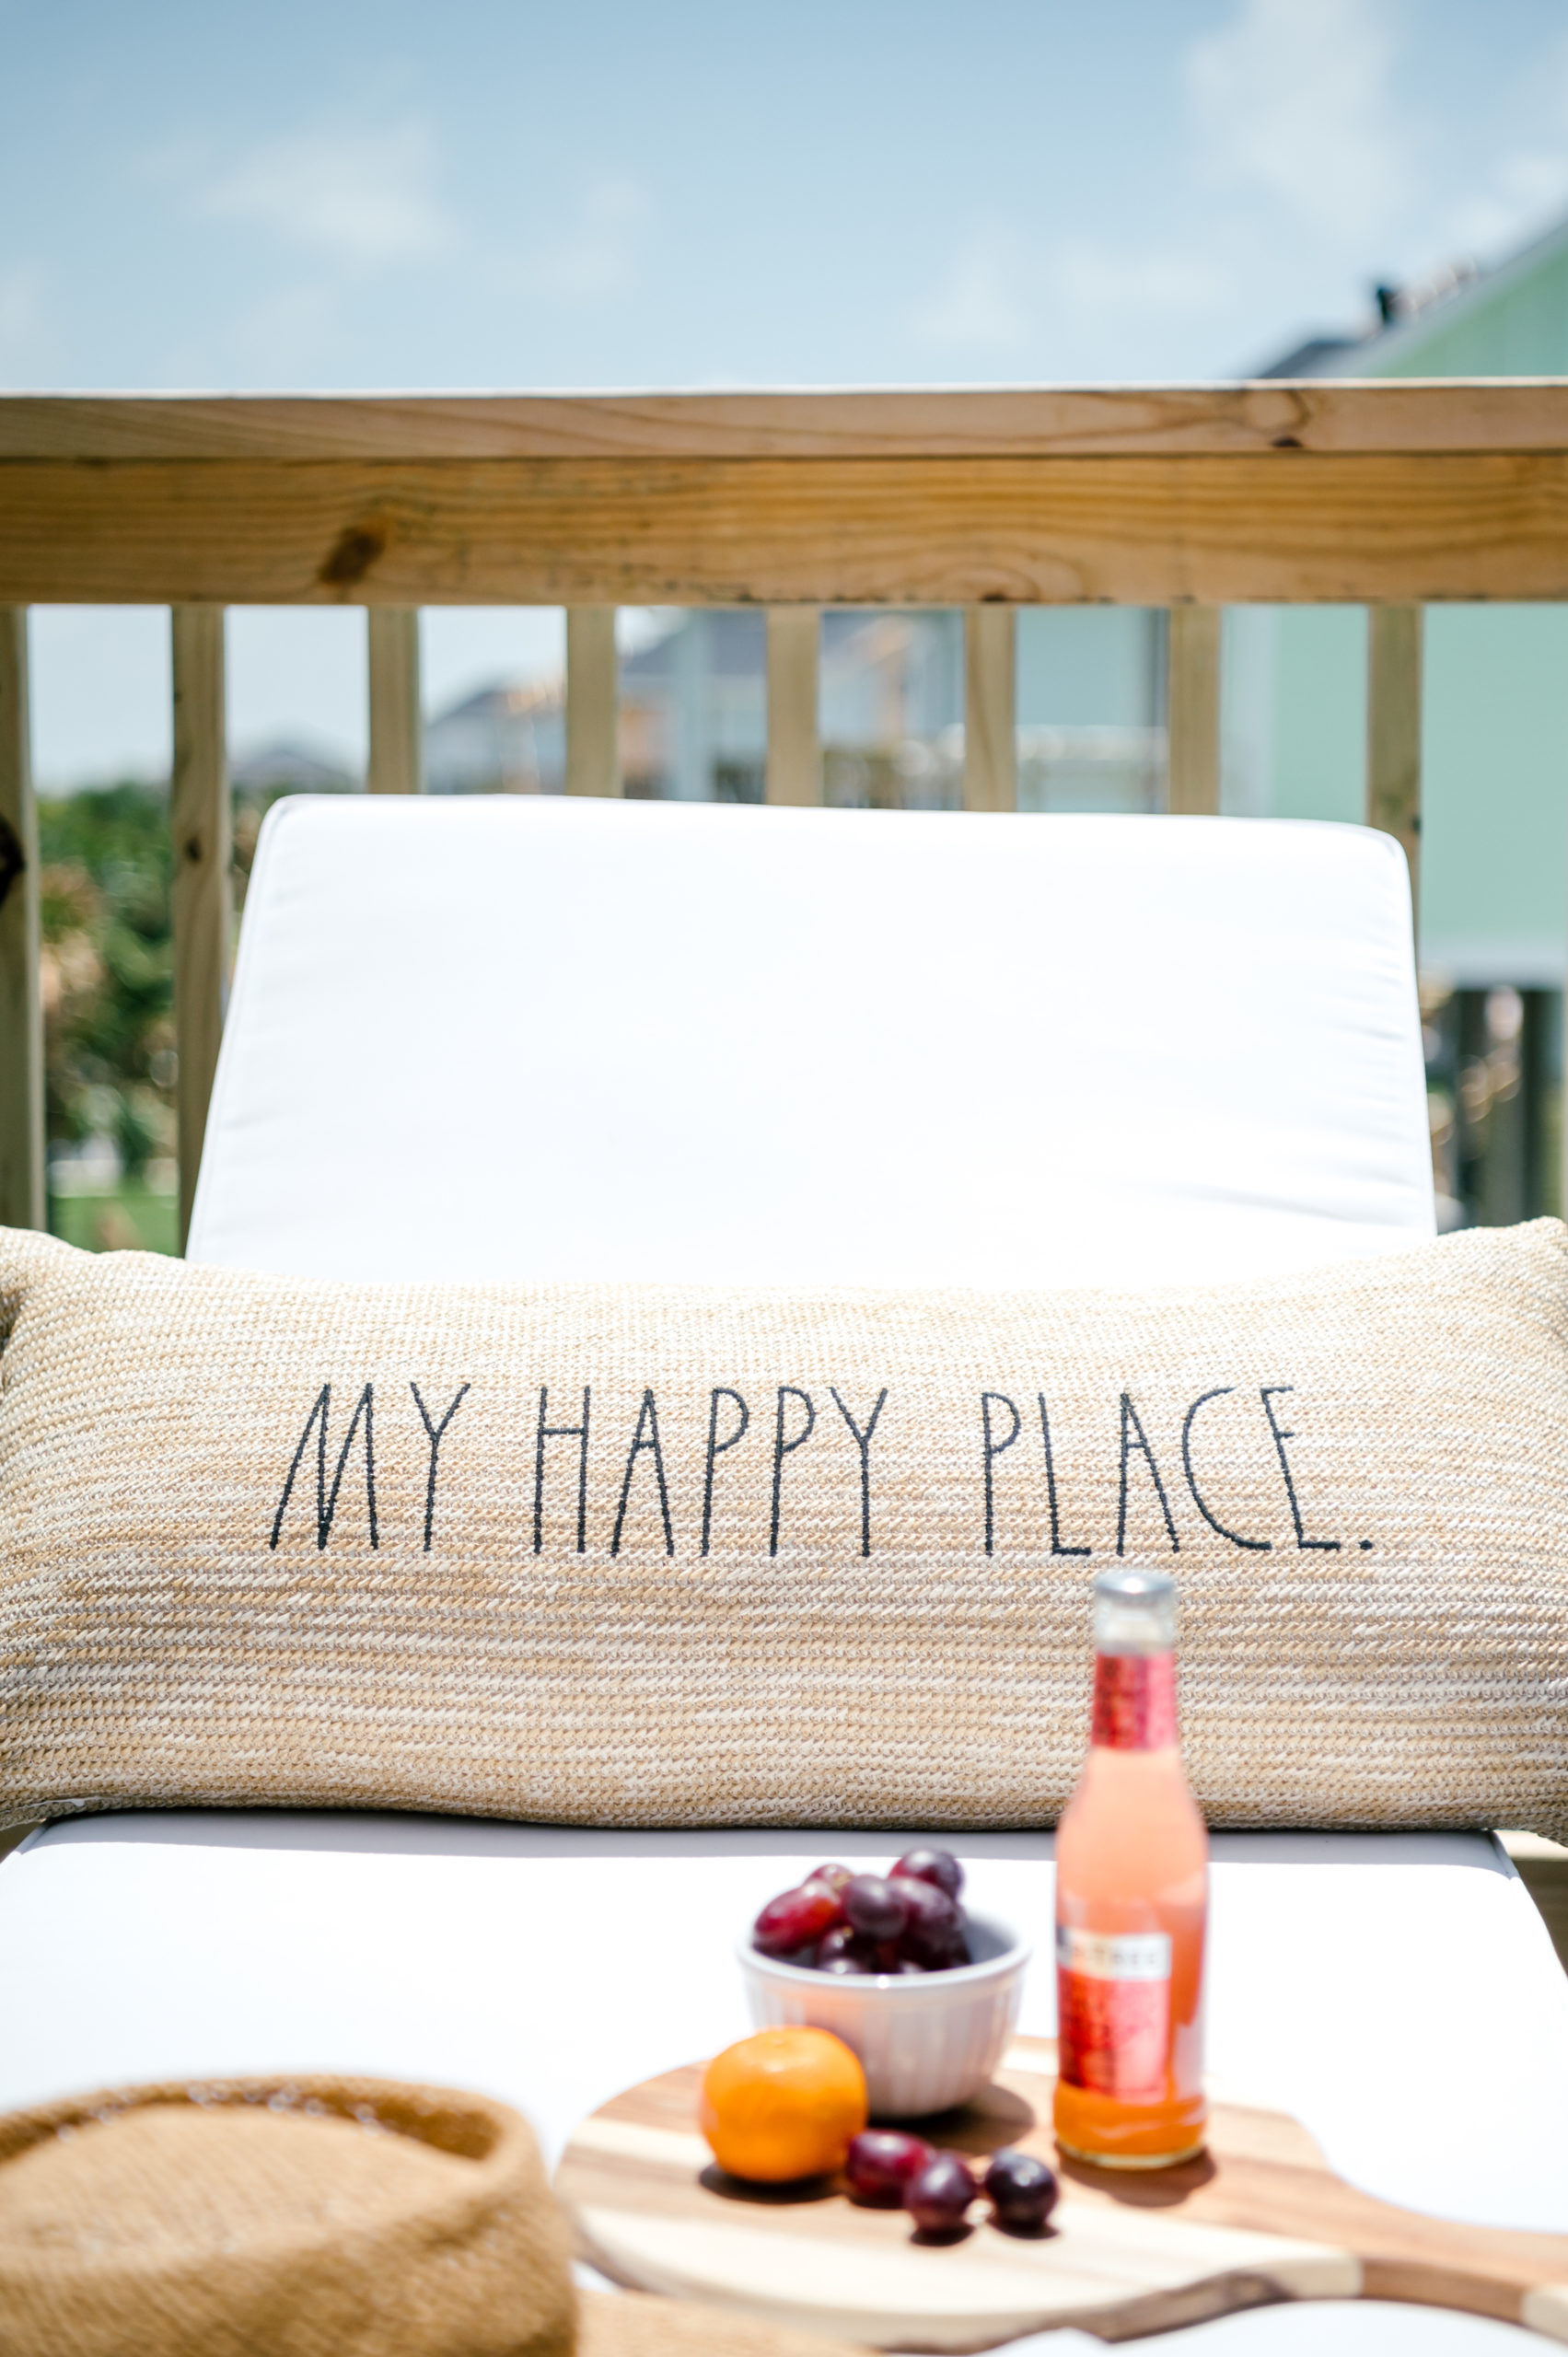 Outdoor lounge chairs with tan pillows reading "Happy place" sitting on the balcony